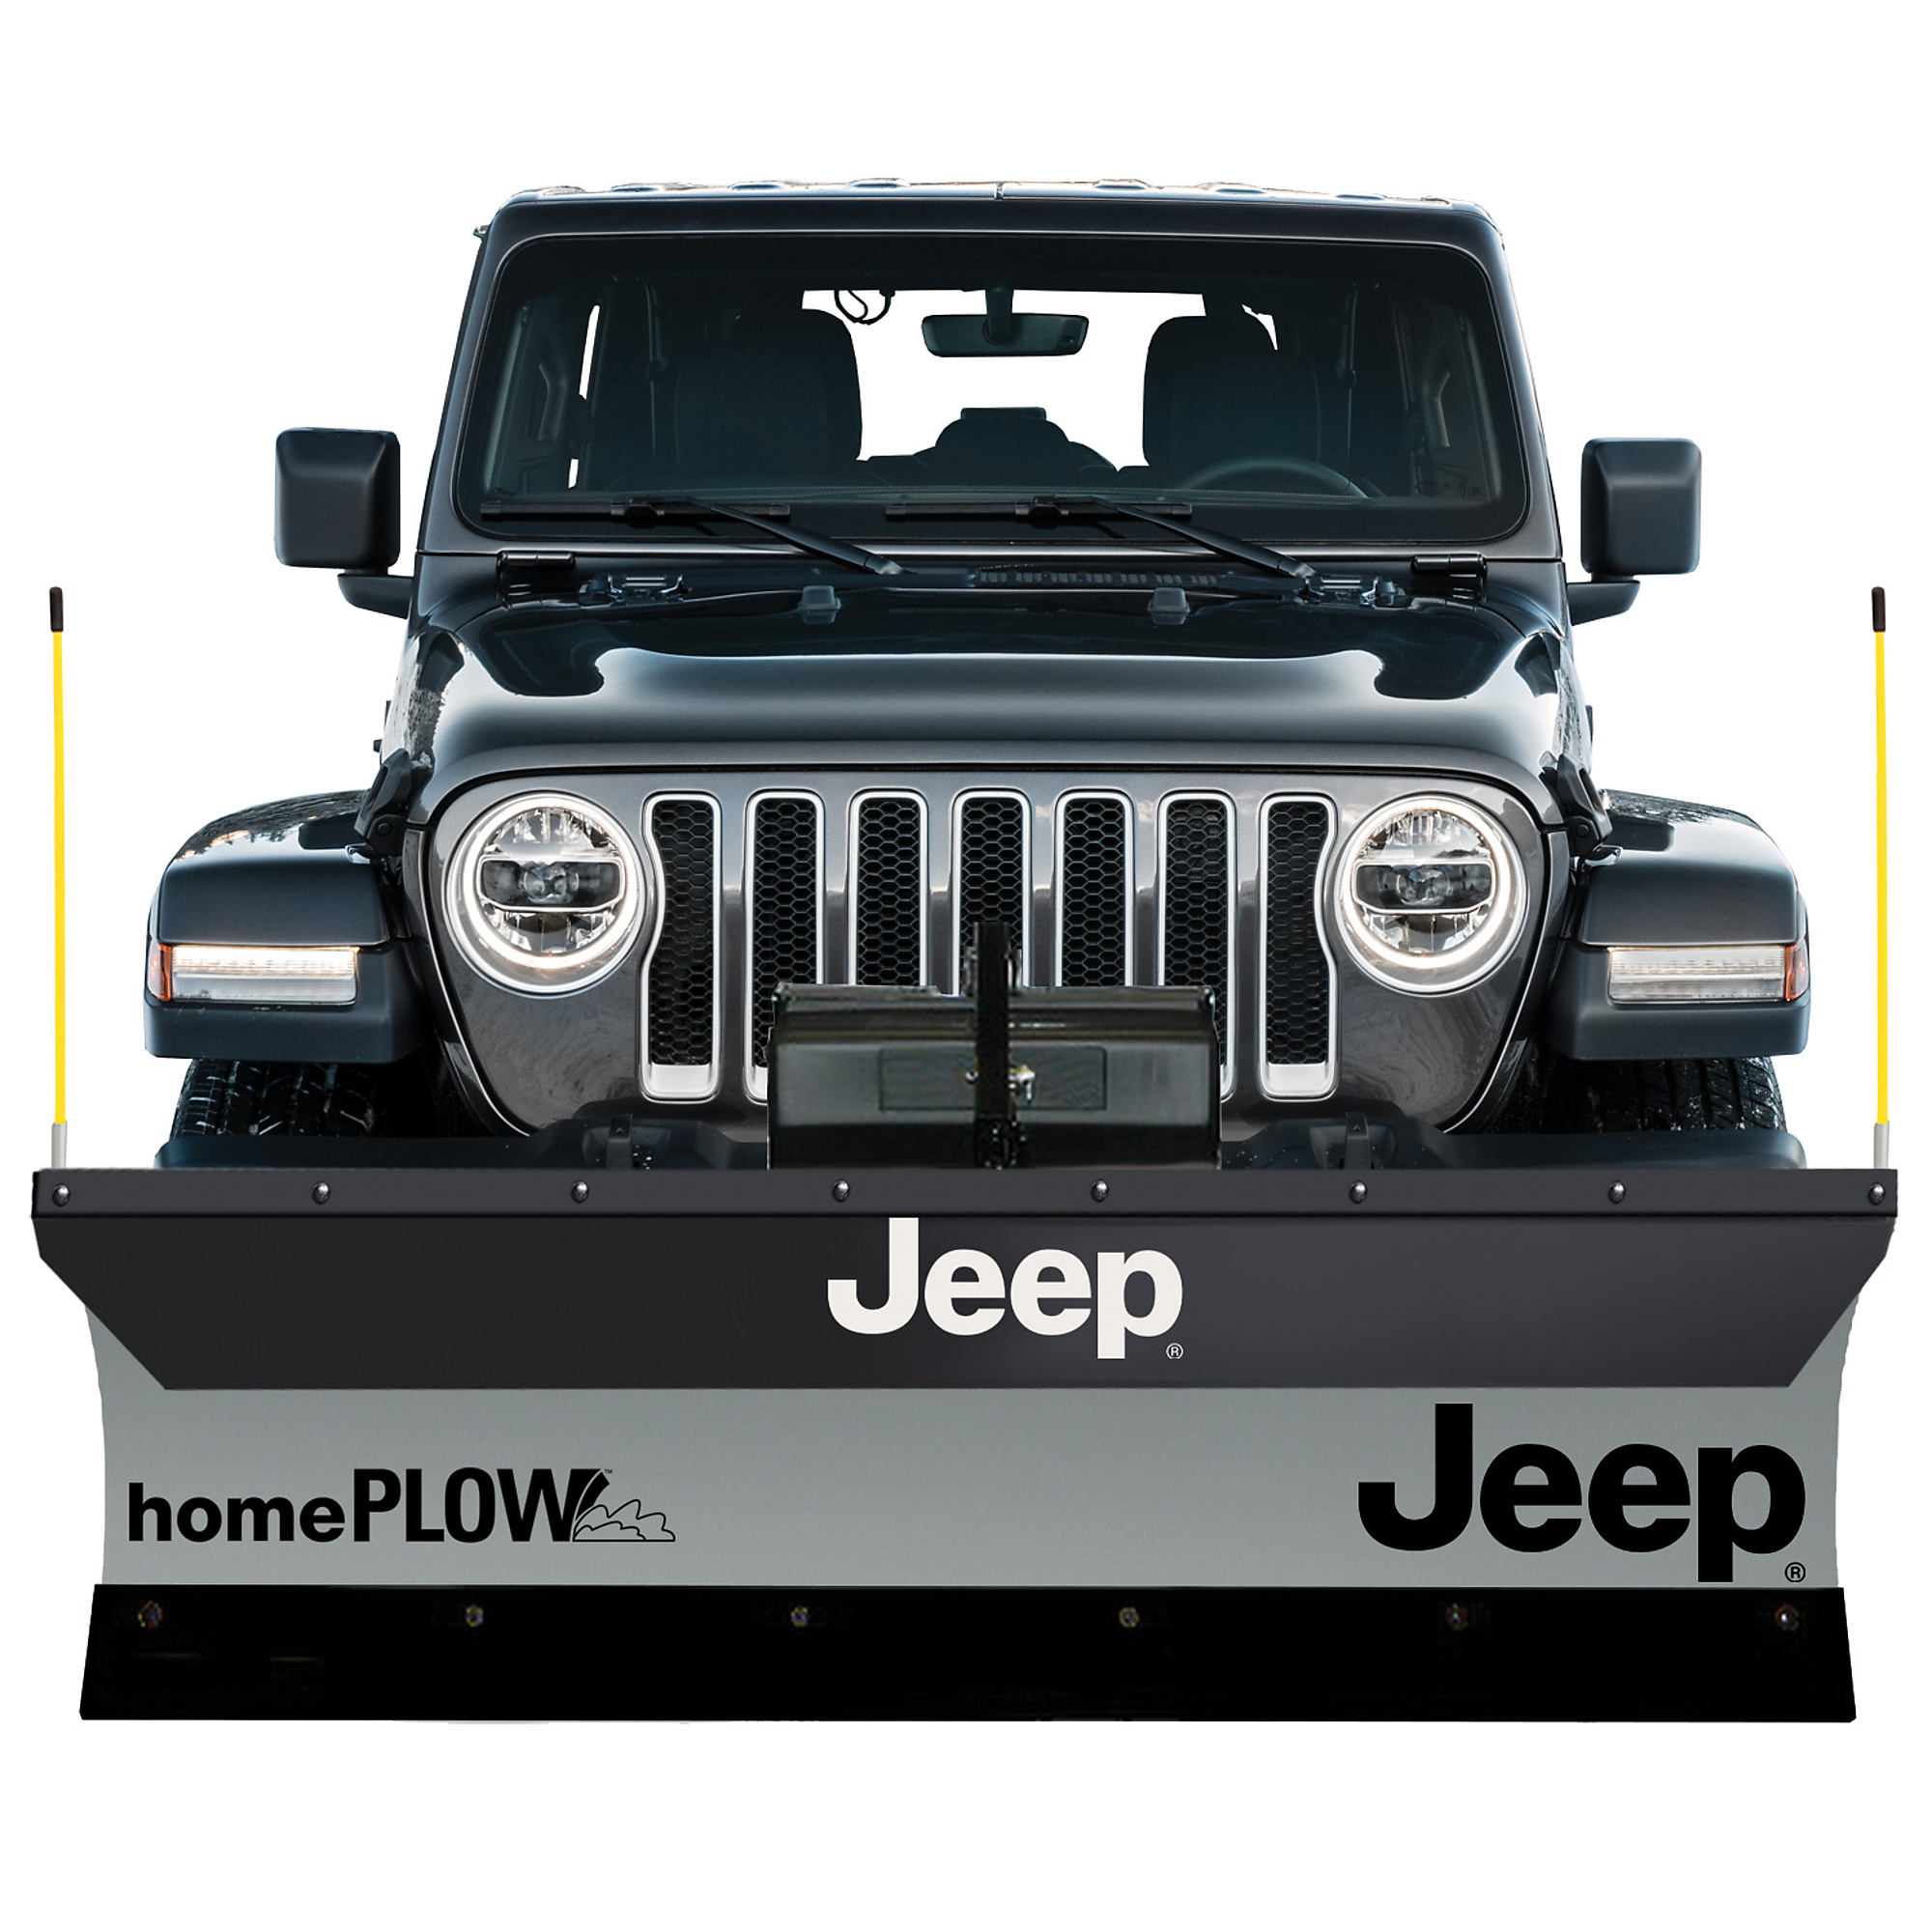 Meyer Products, Jeep Home Plow Power Angle, Blade Length 80 in, Max. Lift Height 12 in, Model 76000